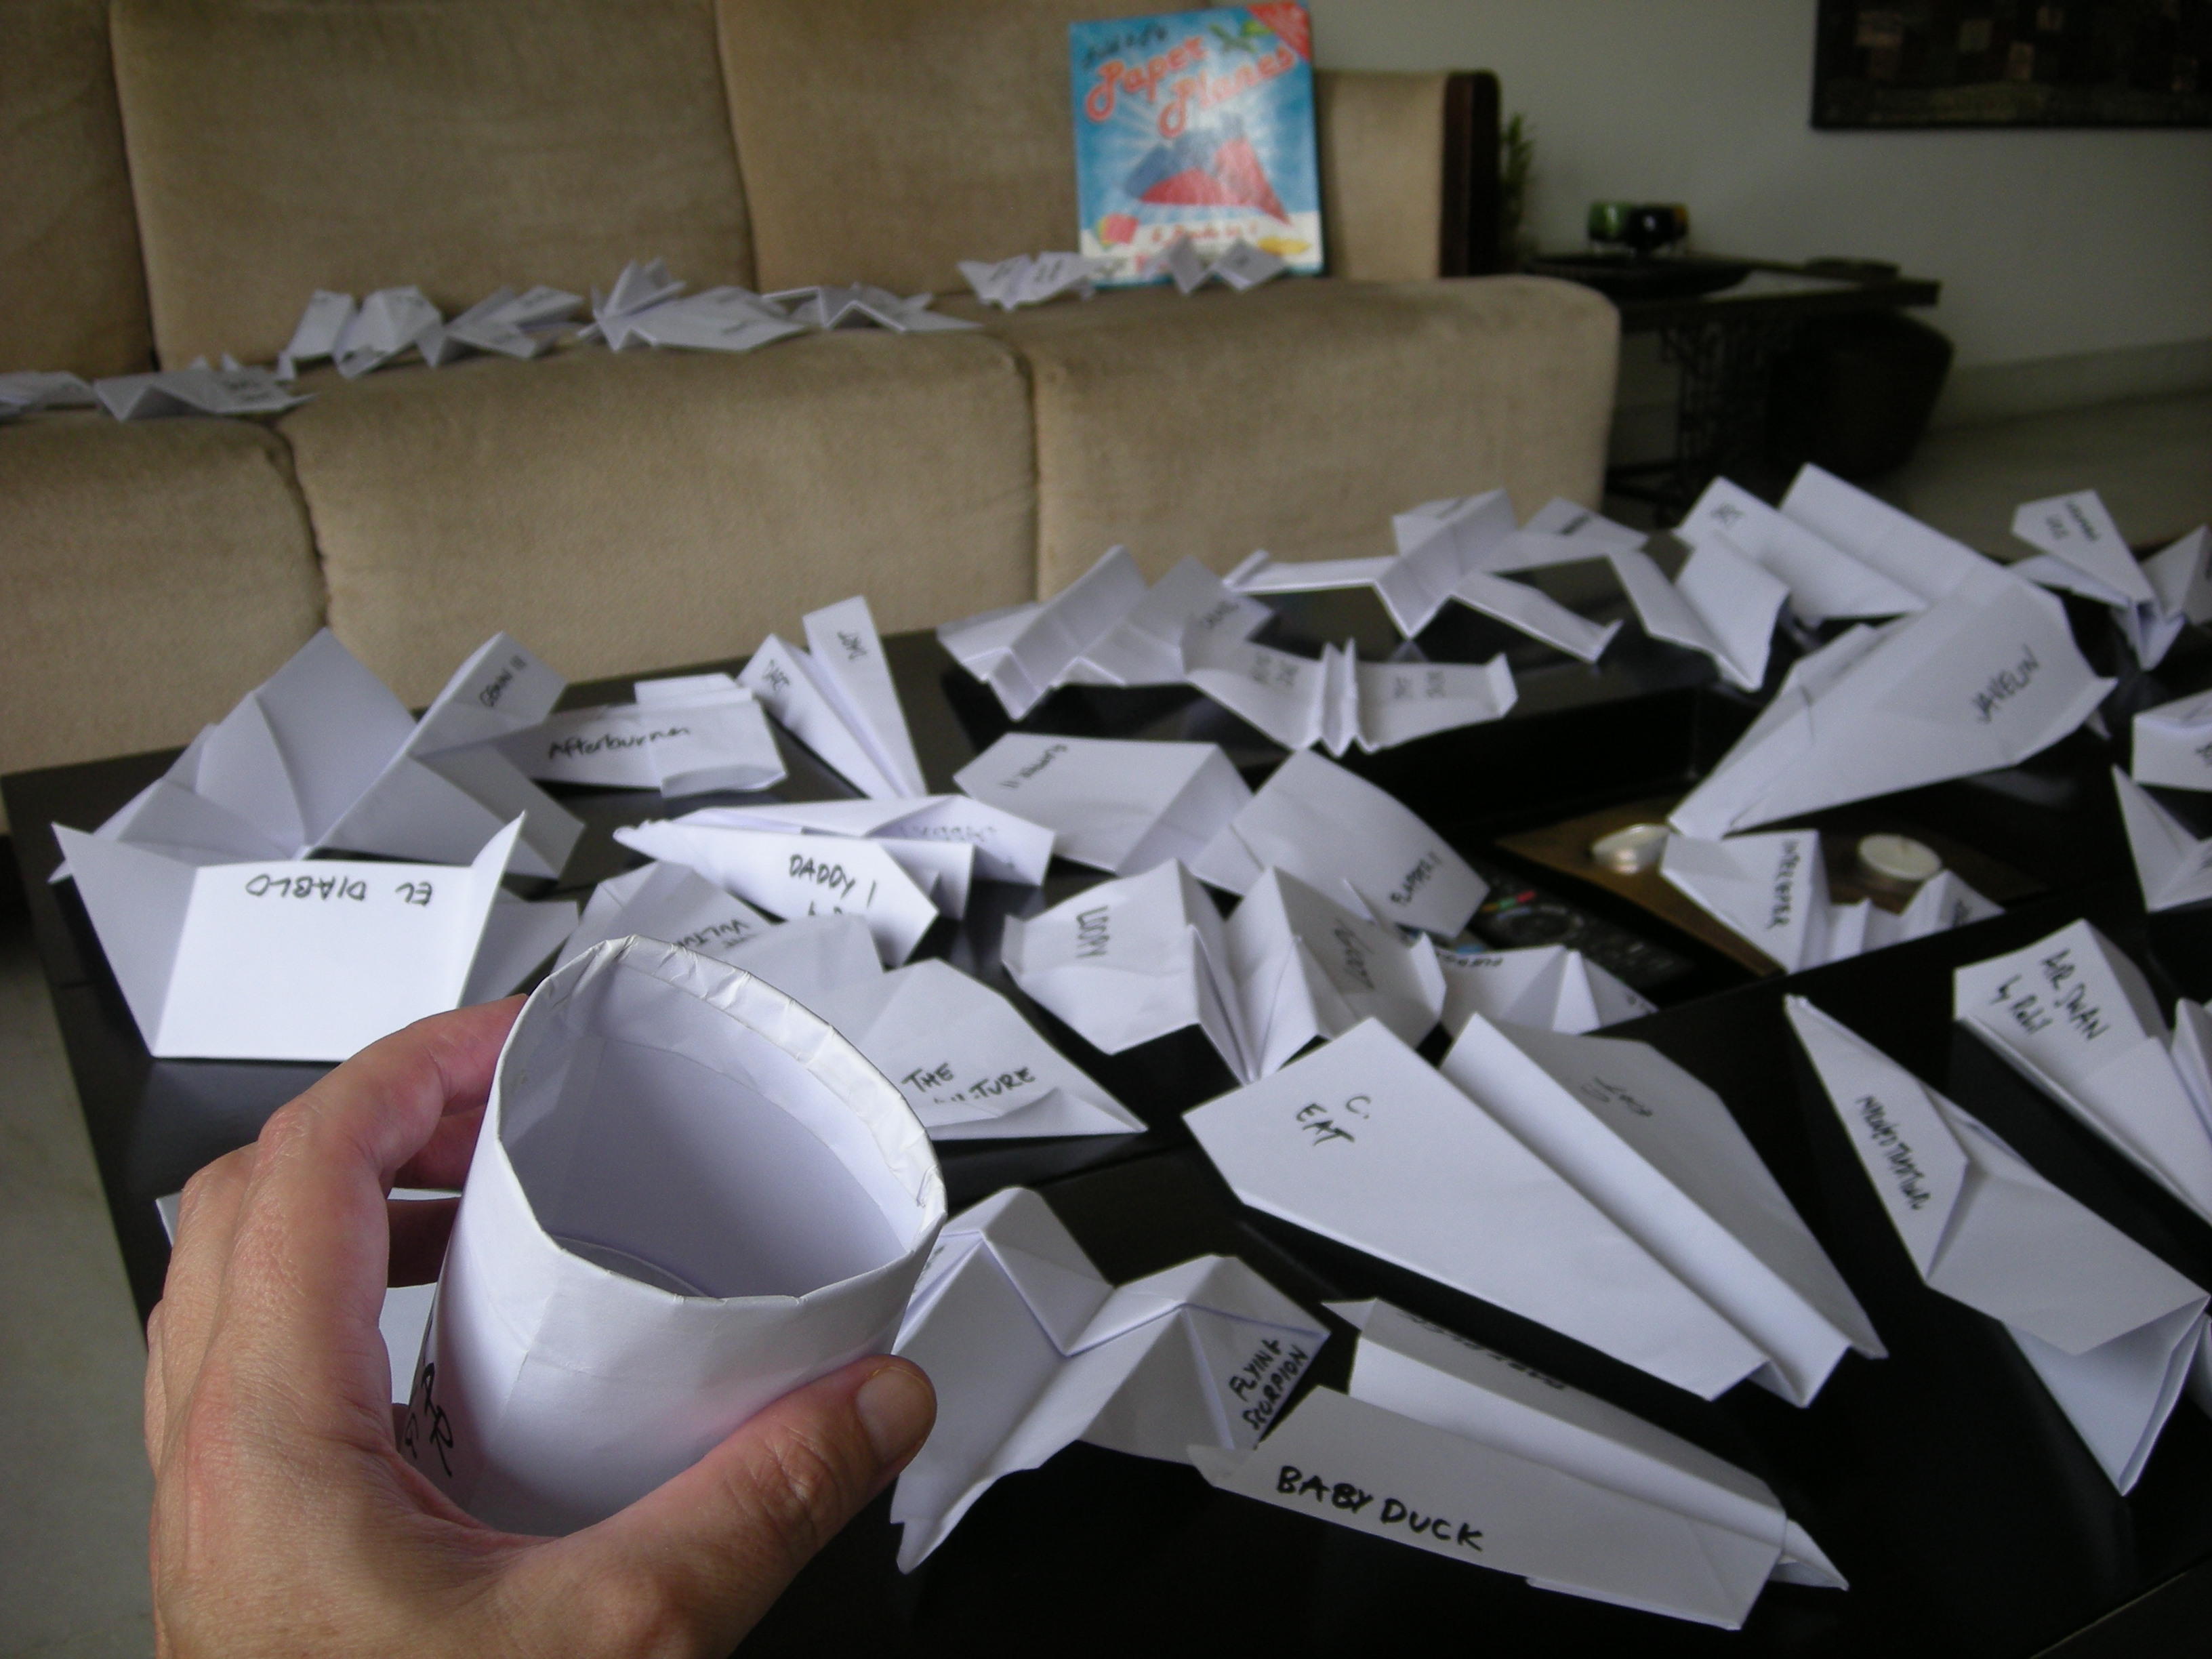 One of fifty different paper airplanes